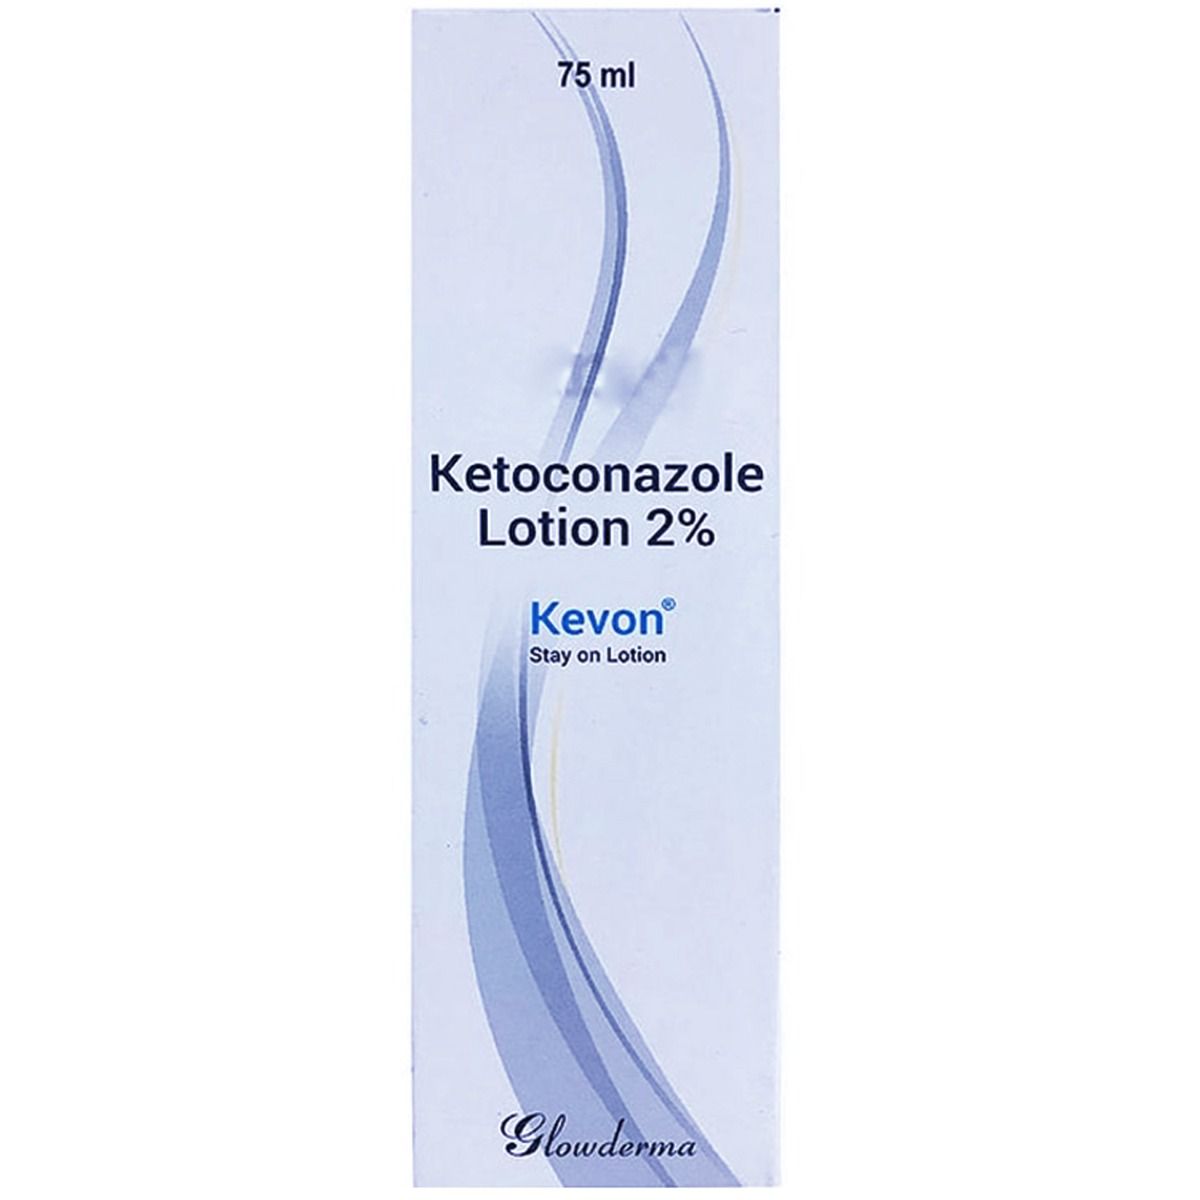 Kevon Lotion 75 ml Price, Uses, Side Effects, Composition - Apollo Pharmacy